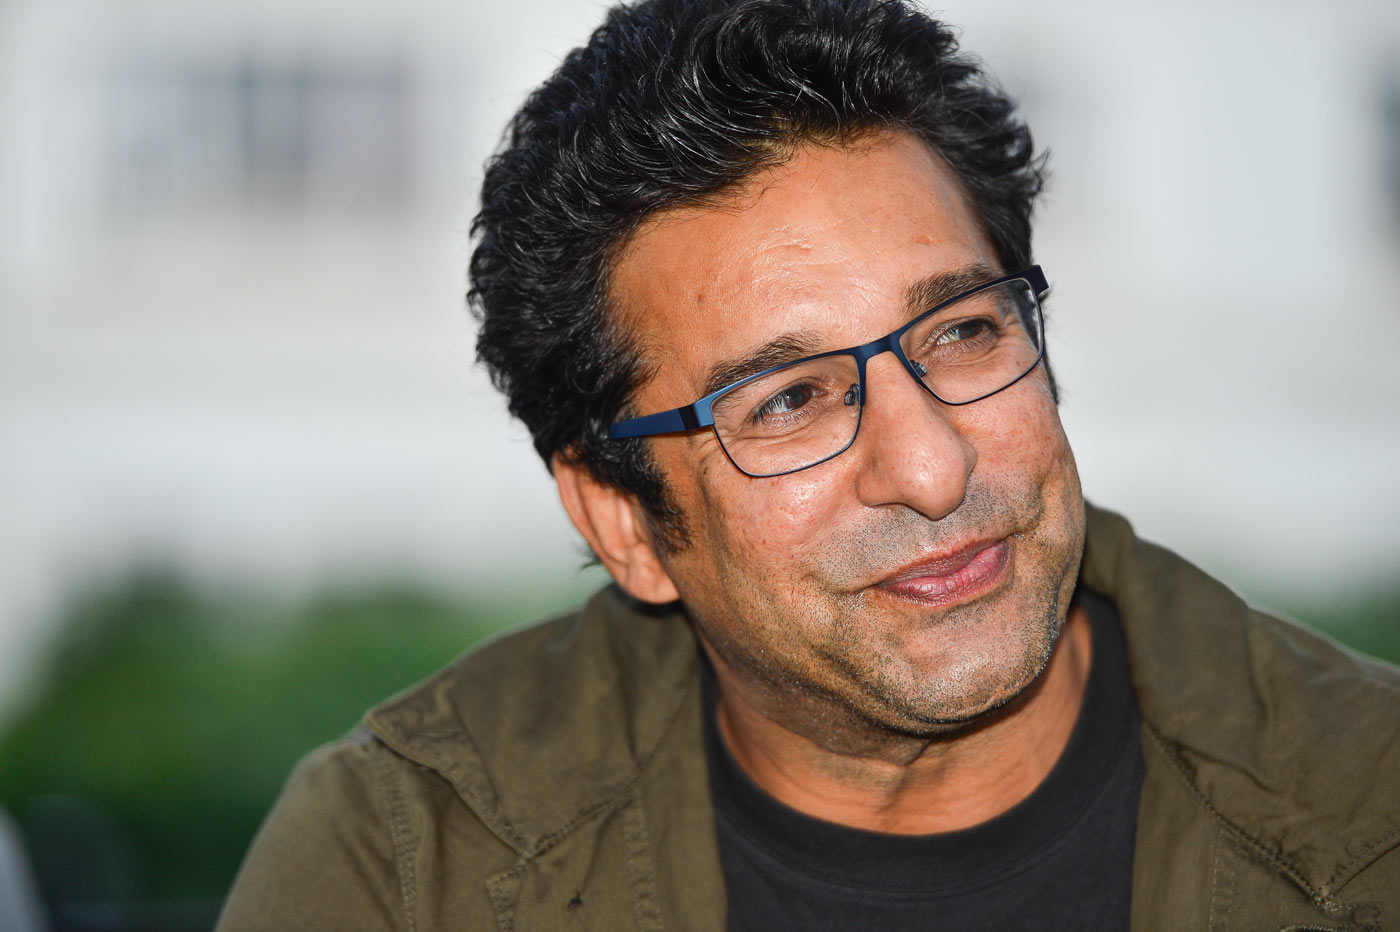 bowling legend wasim akram shares his thoughts on the young bowlers which formed the camp that he trained in karachi photo courtesy cricinfo